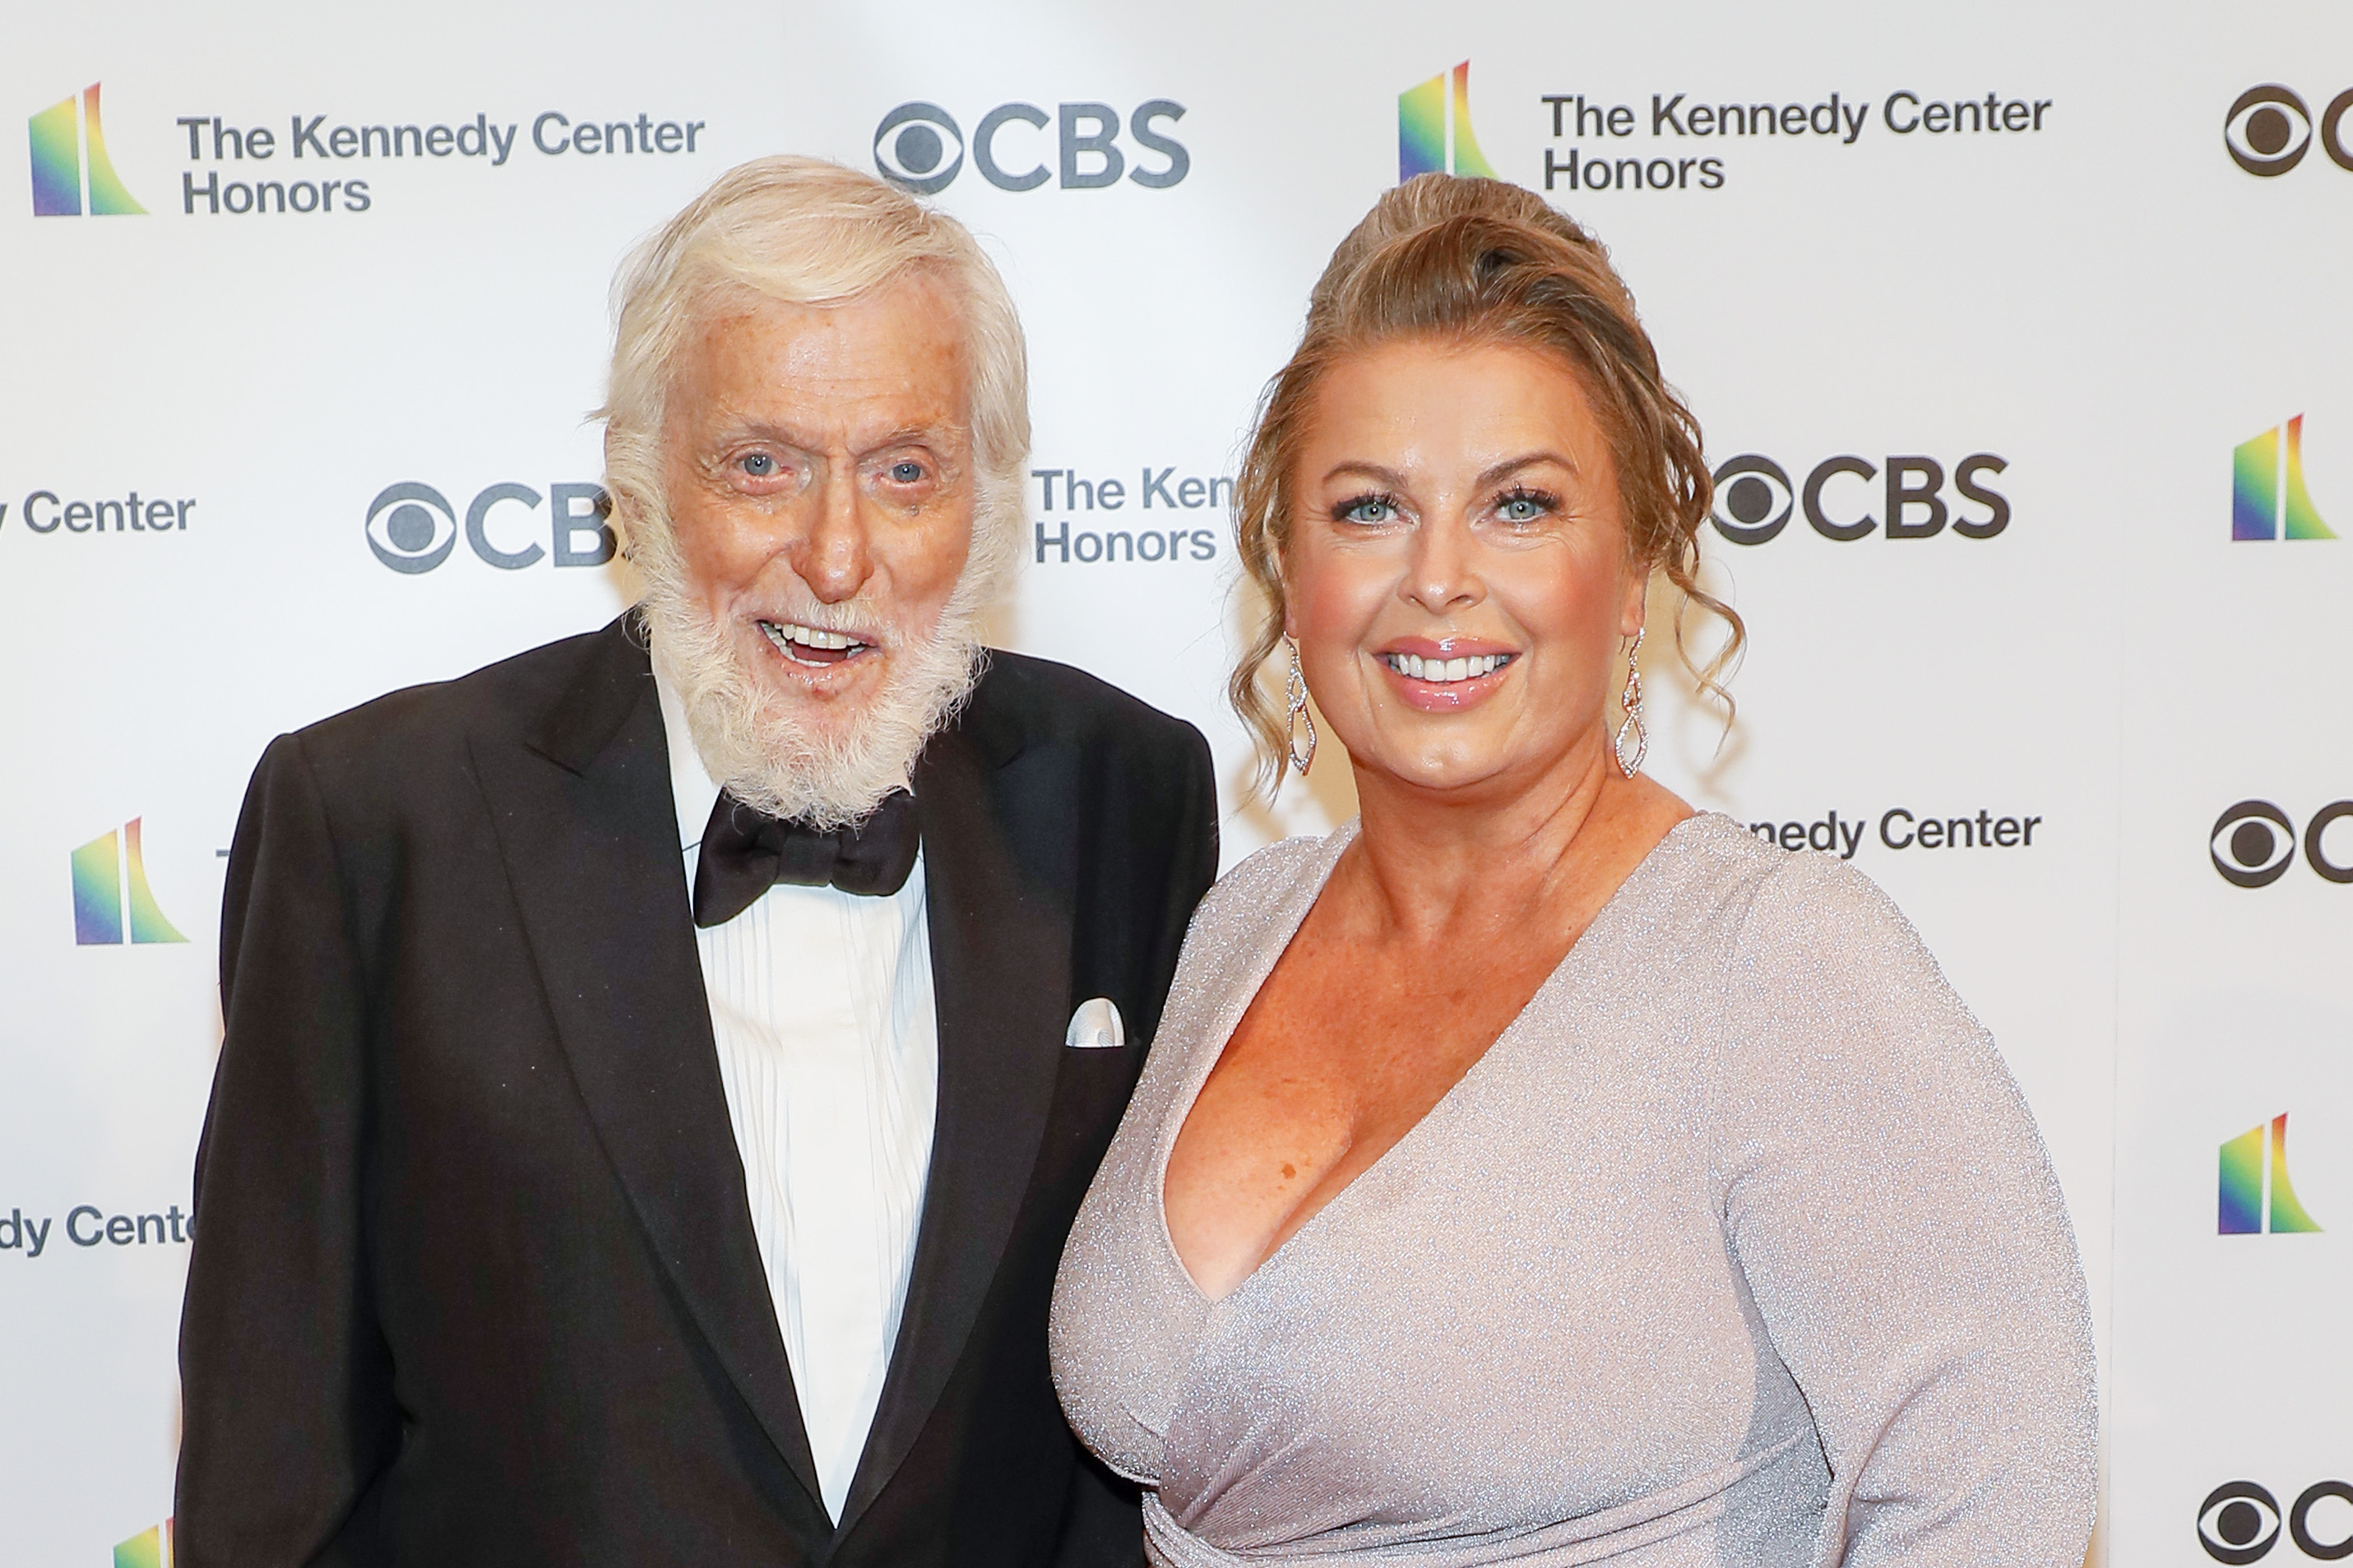 Dick Van Dyke and Arlene Silver at the 43rd Annual Kennedy Center Honors, May 21, 2021, in Washington, DC | Source: Getty Images